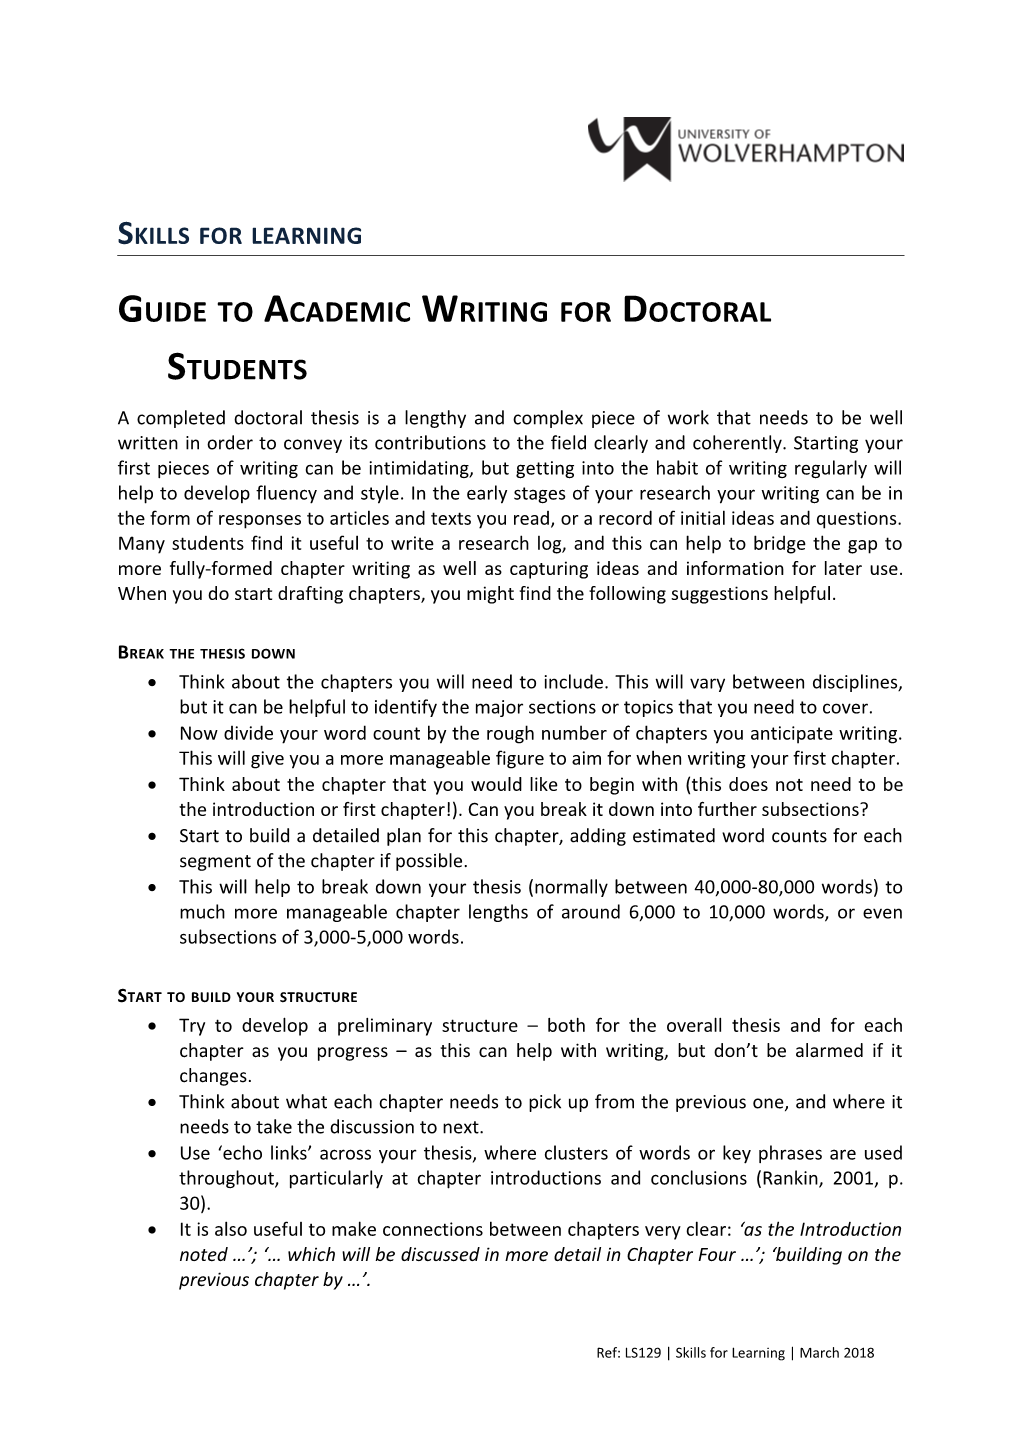 Guide to Academic Writing for Doctoral Students